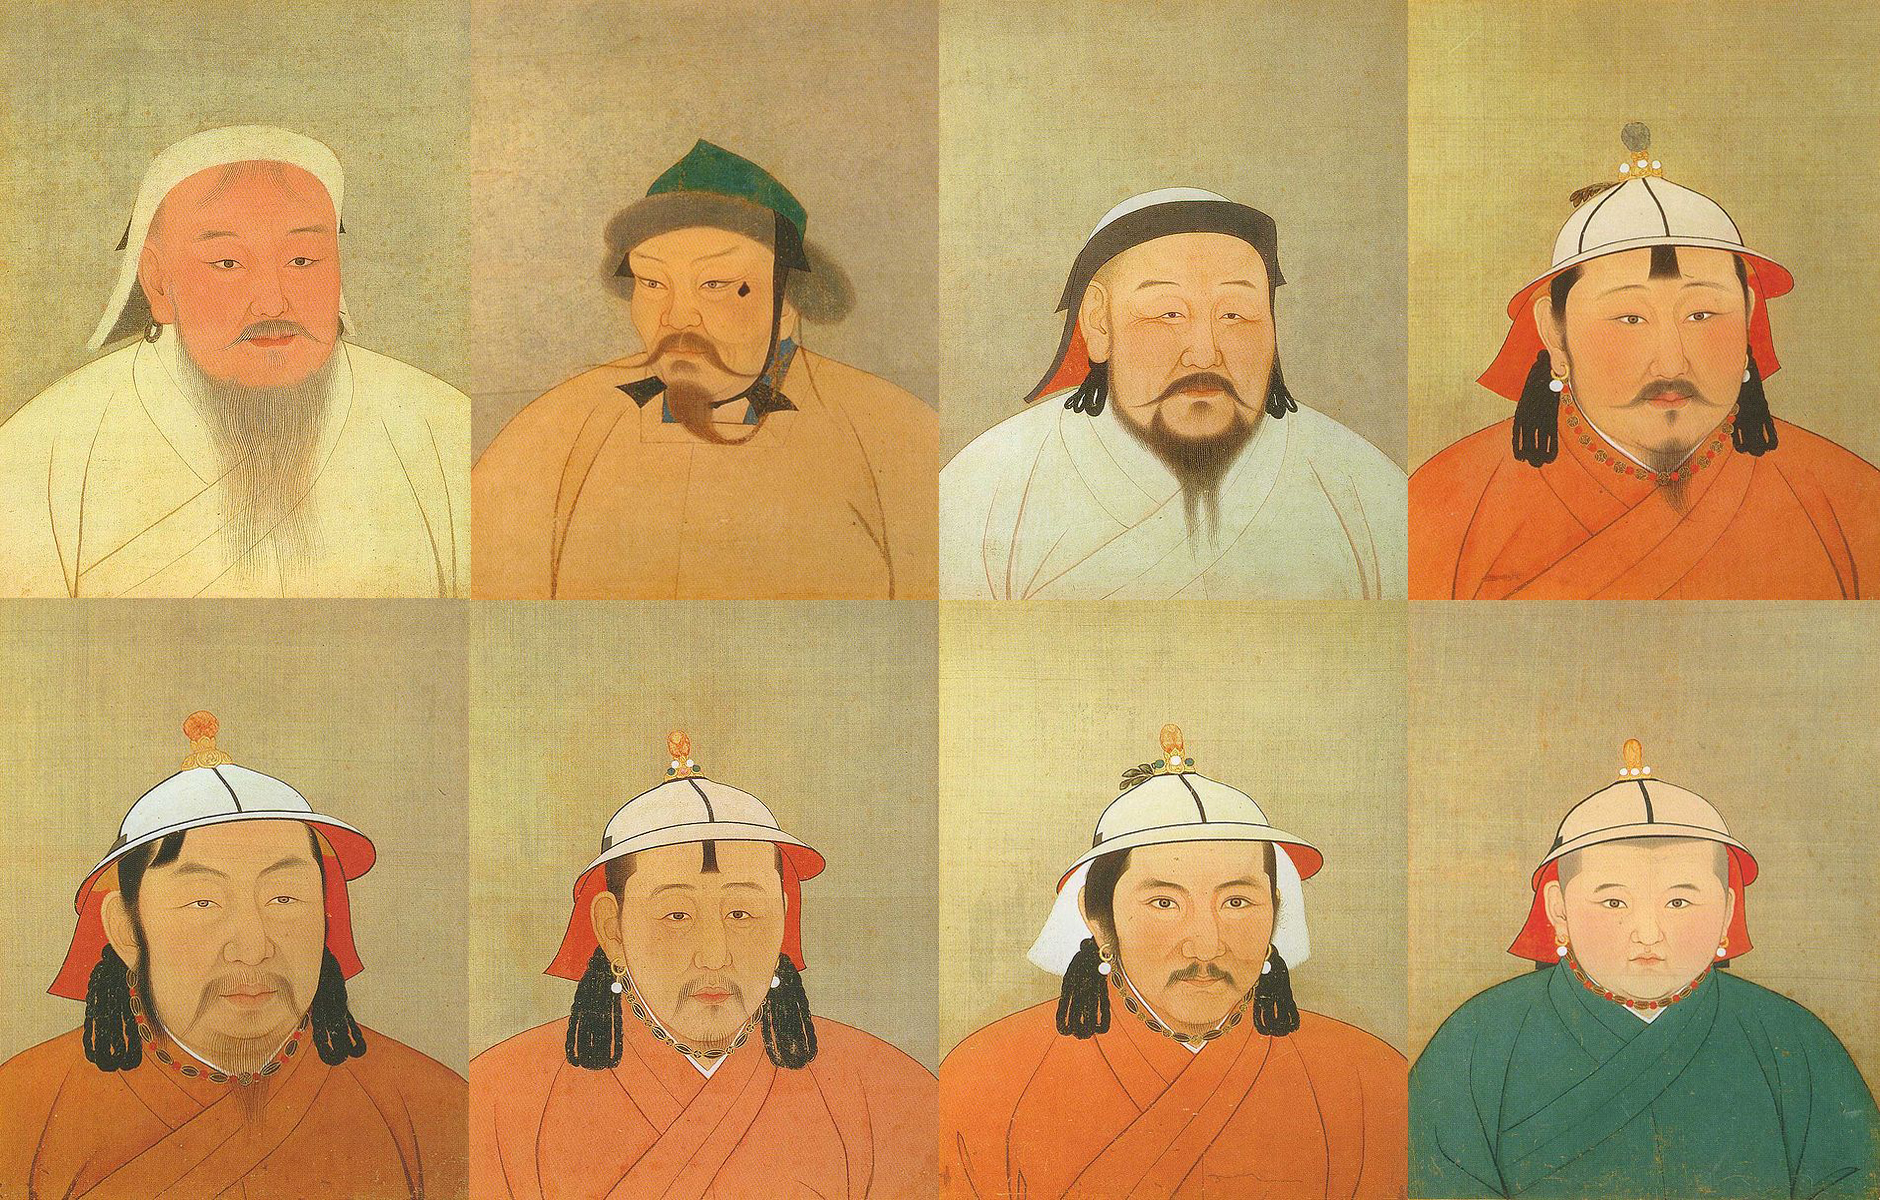 Why were the mongols so successful? What can we learn from them?